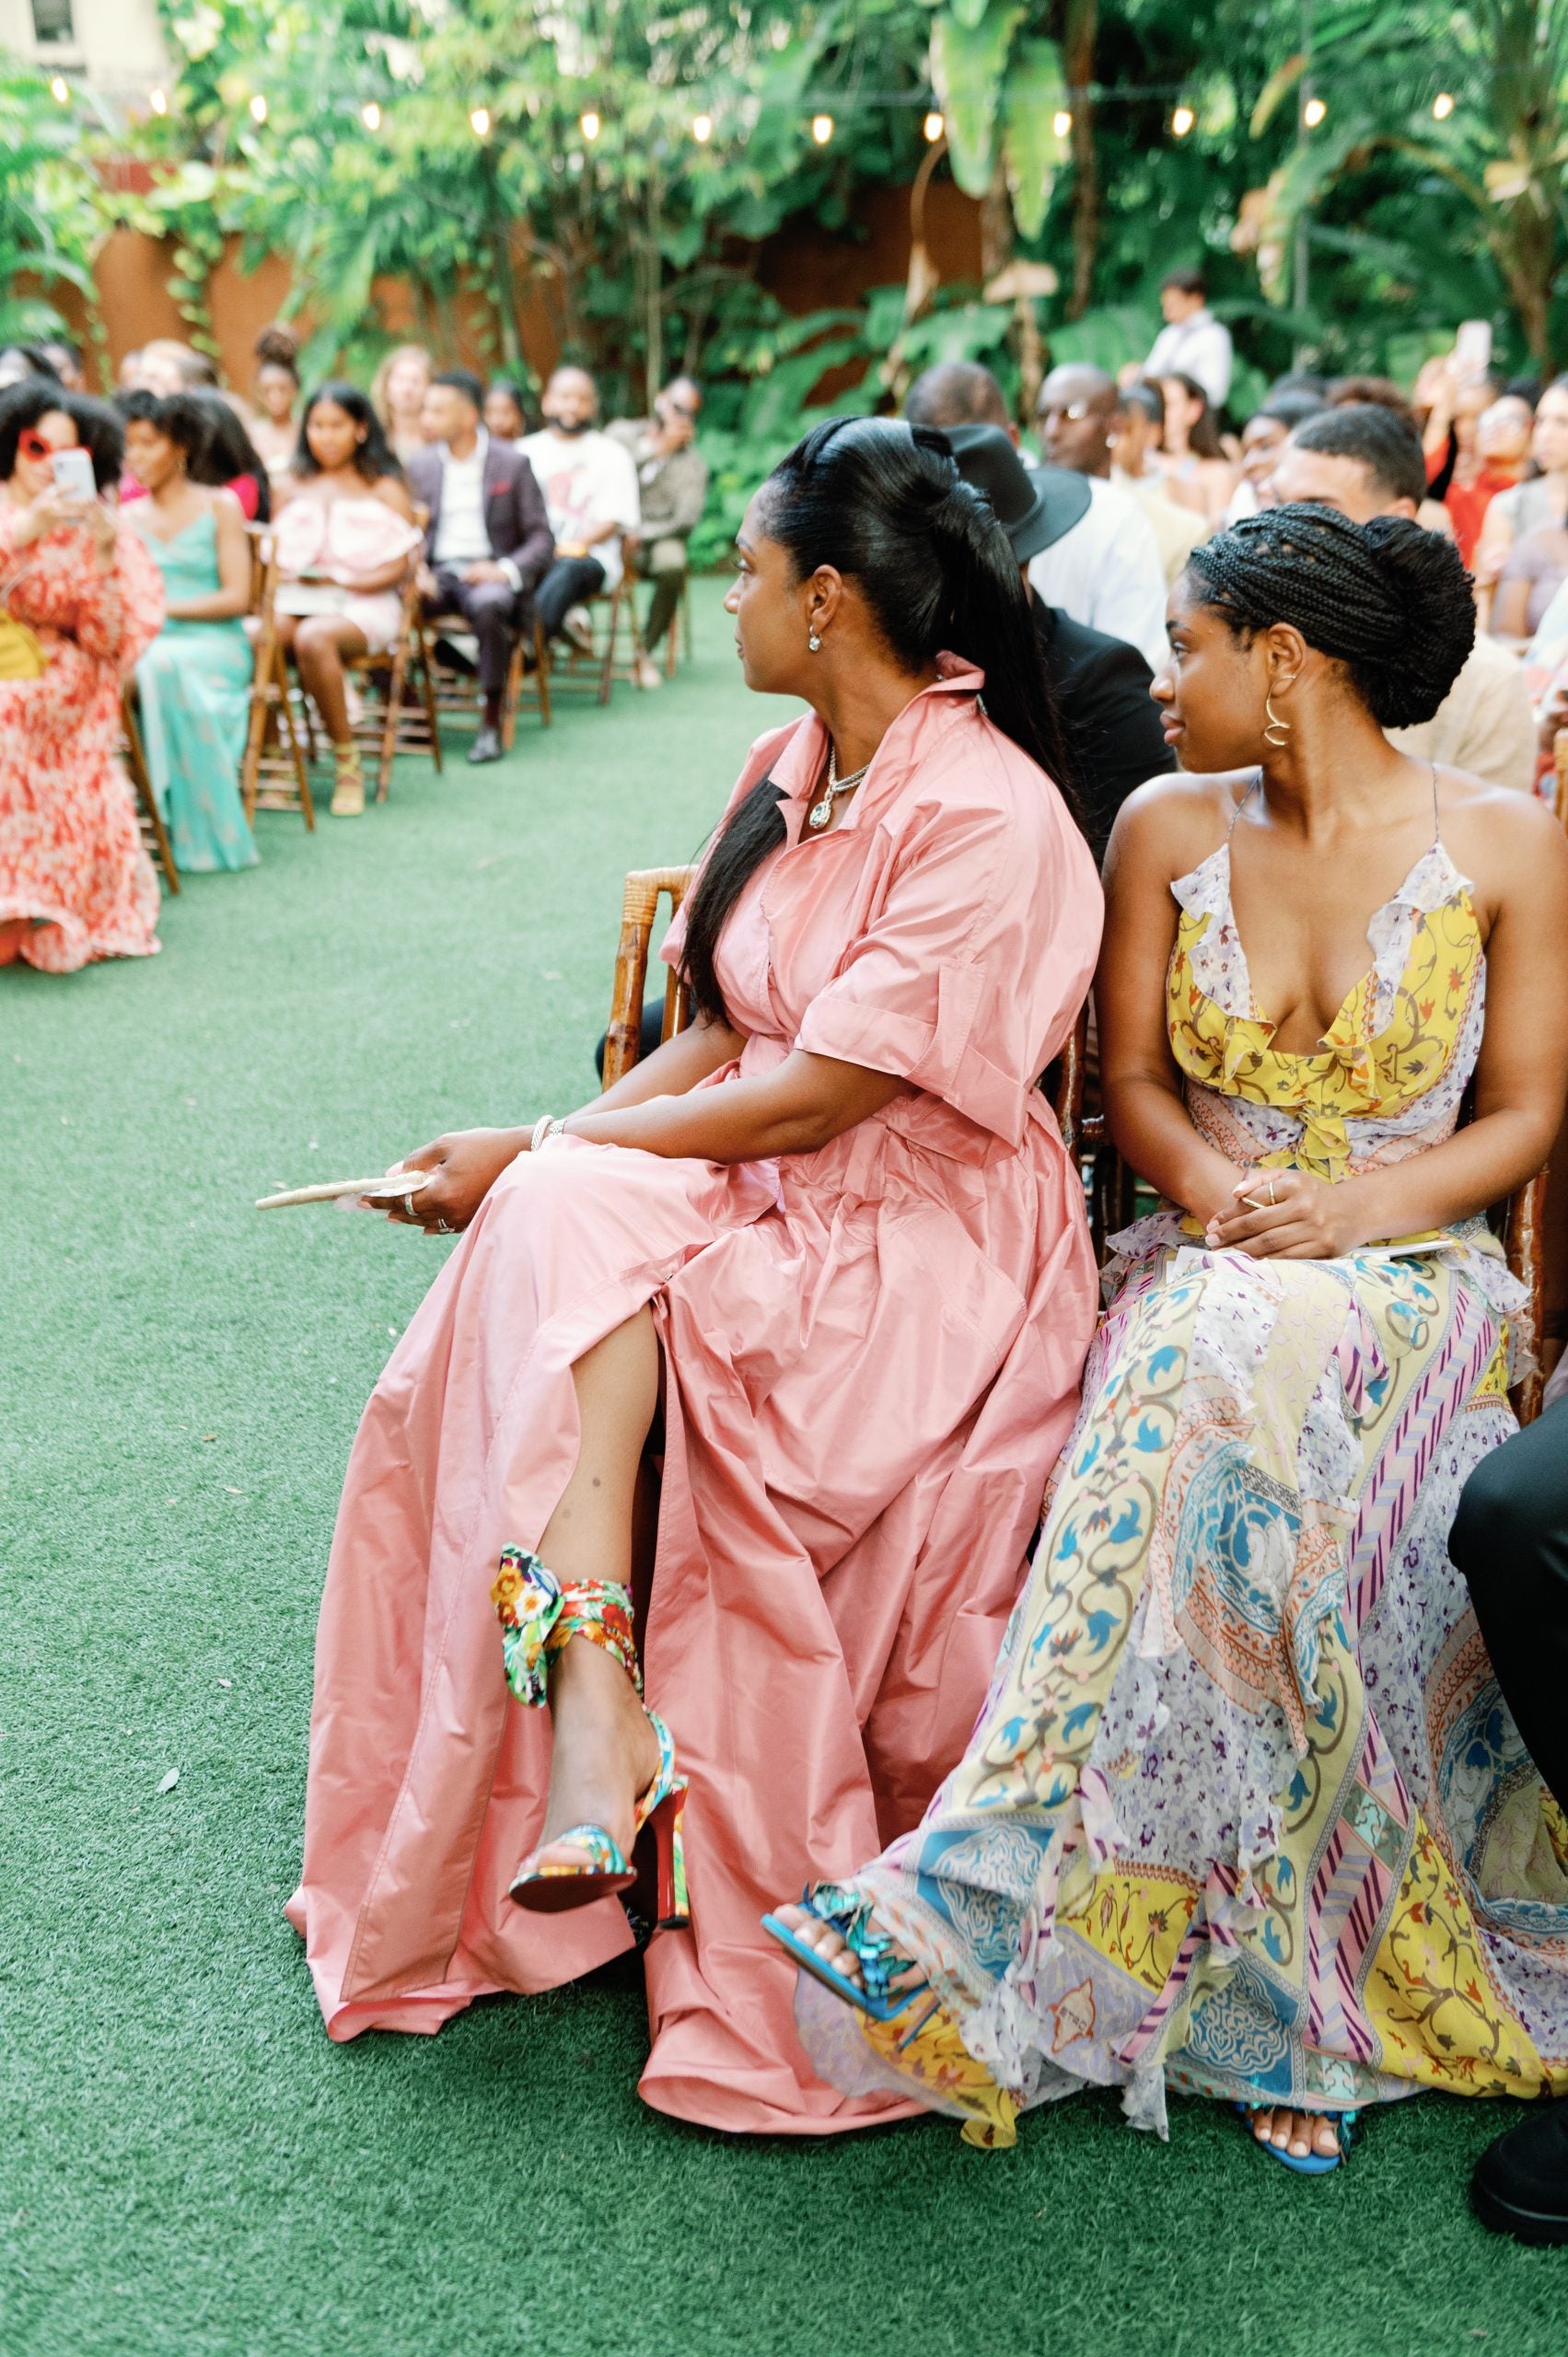 Telsha Anderson-Boone's Nontraditional Wedding Dress Should Be On Your Moodboard ASAP